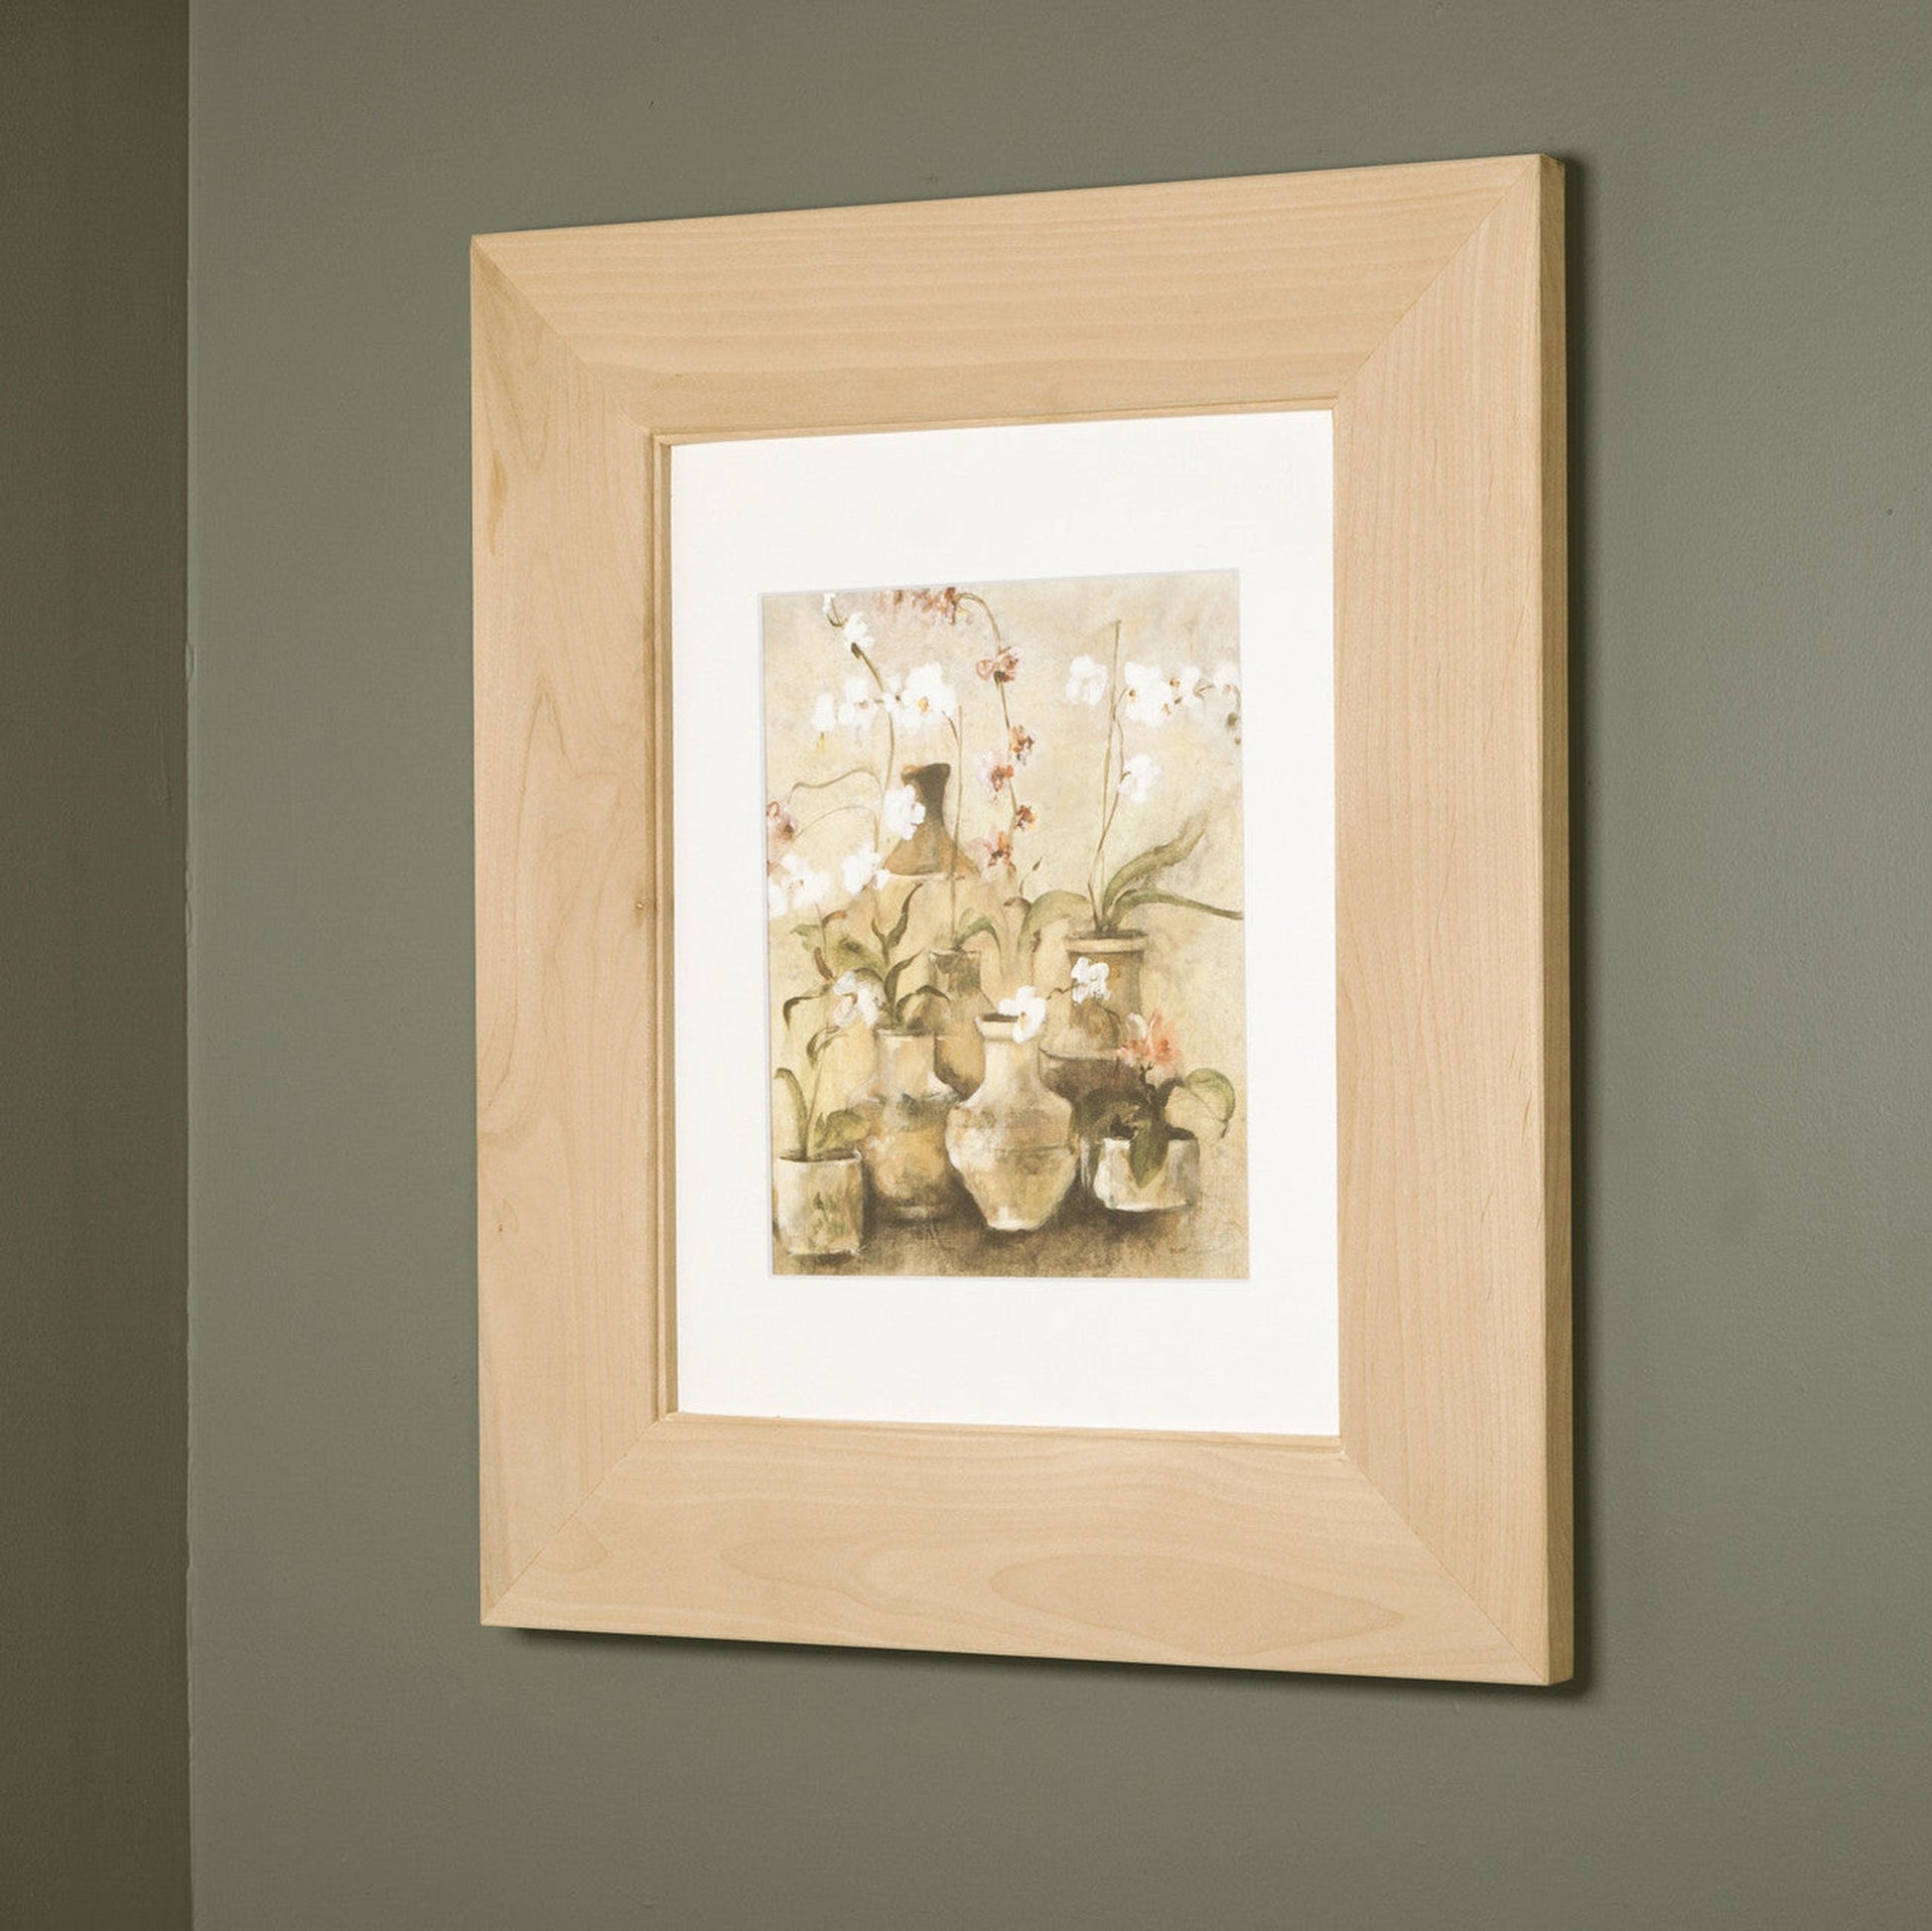 Fox Hollow Furnishings 14" x 16" Regular Unfinished Standard 4" Depth Recessed Picture Frame Medicine Cabinet